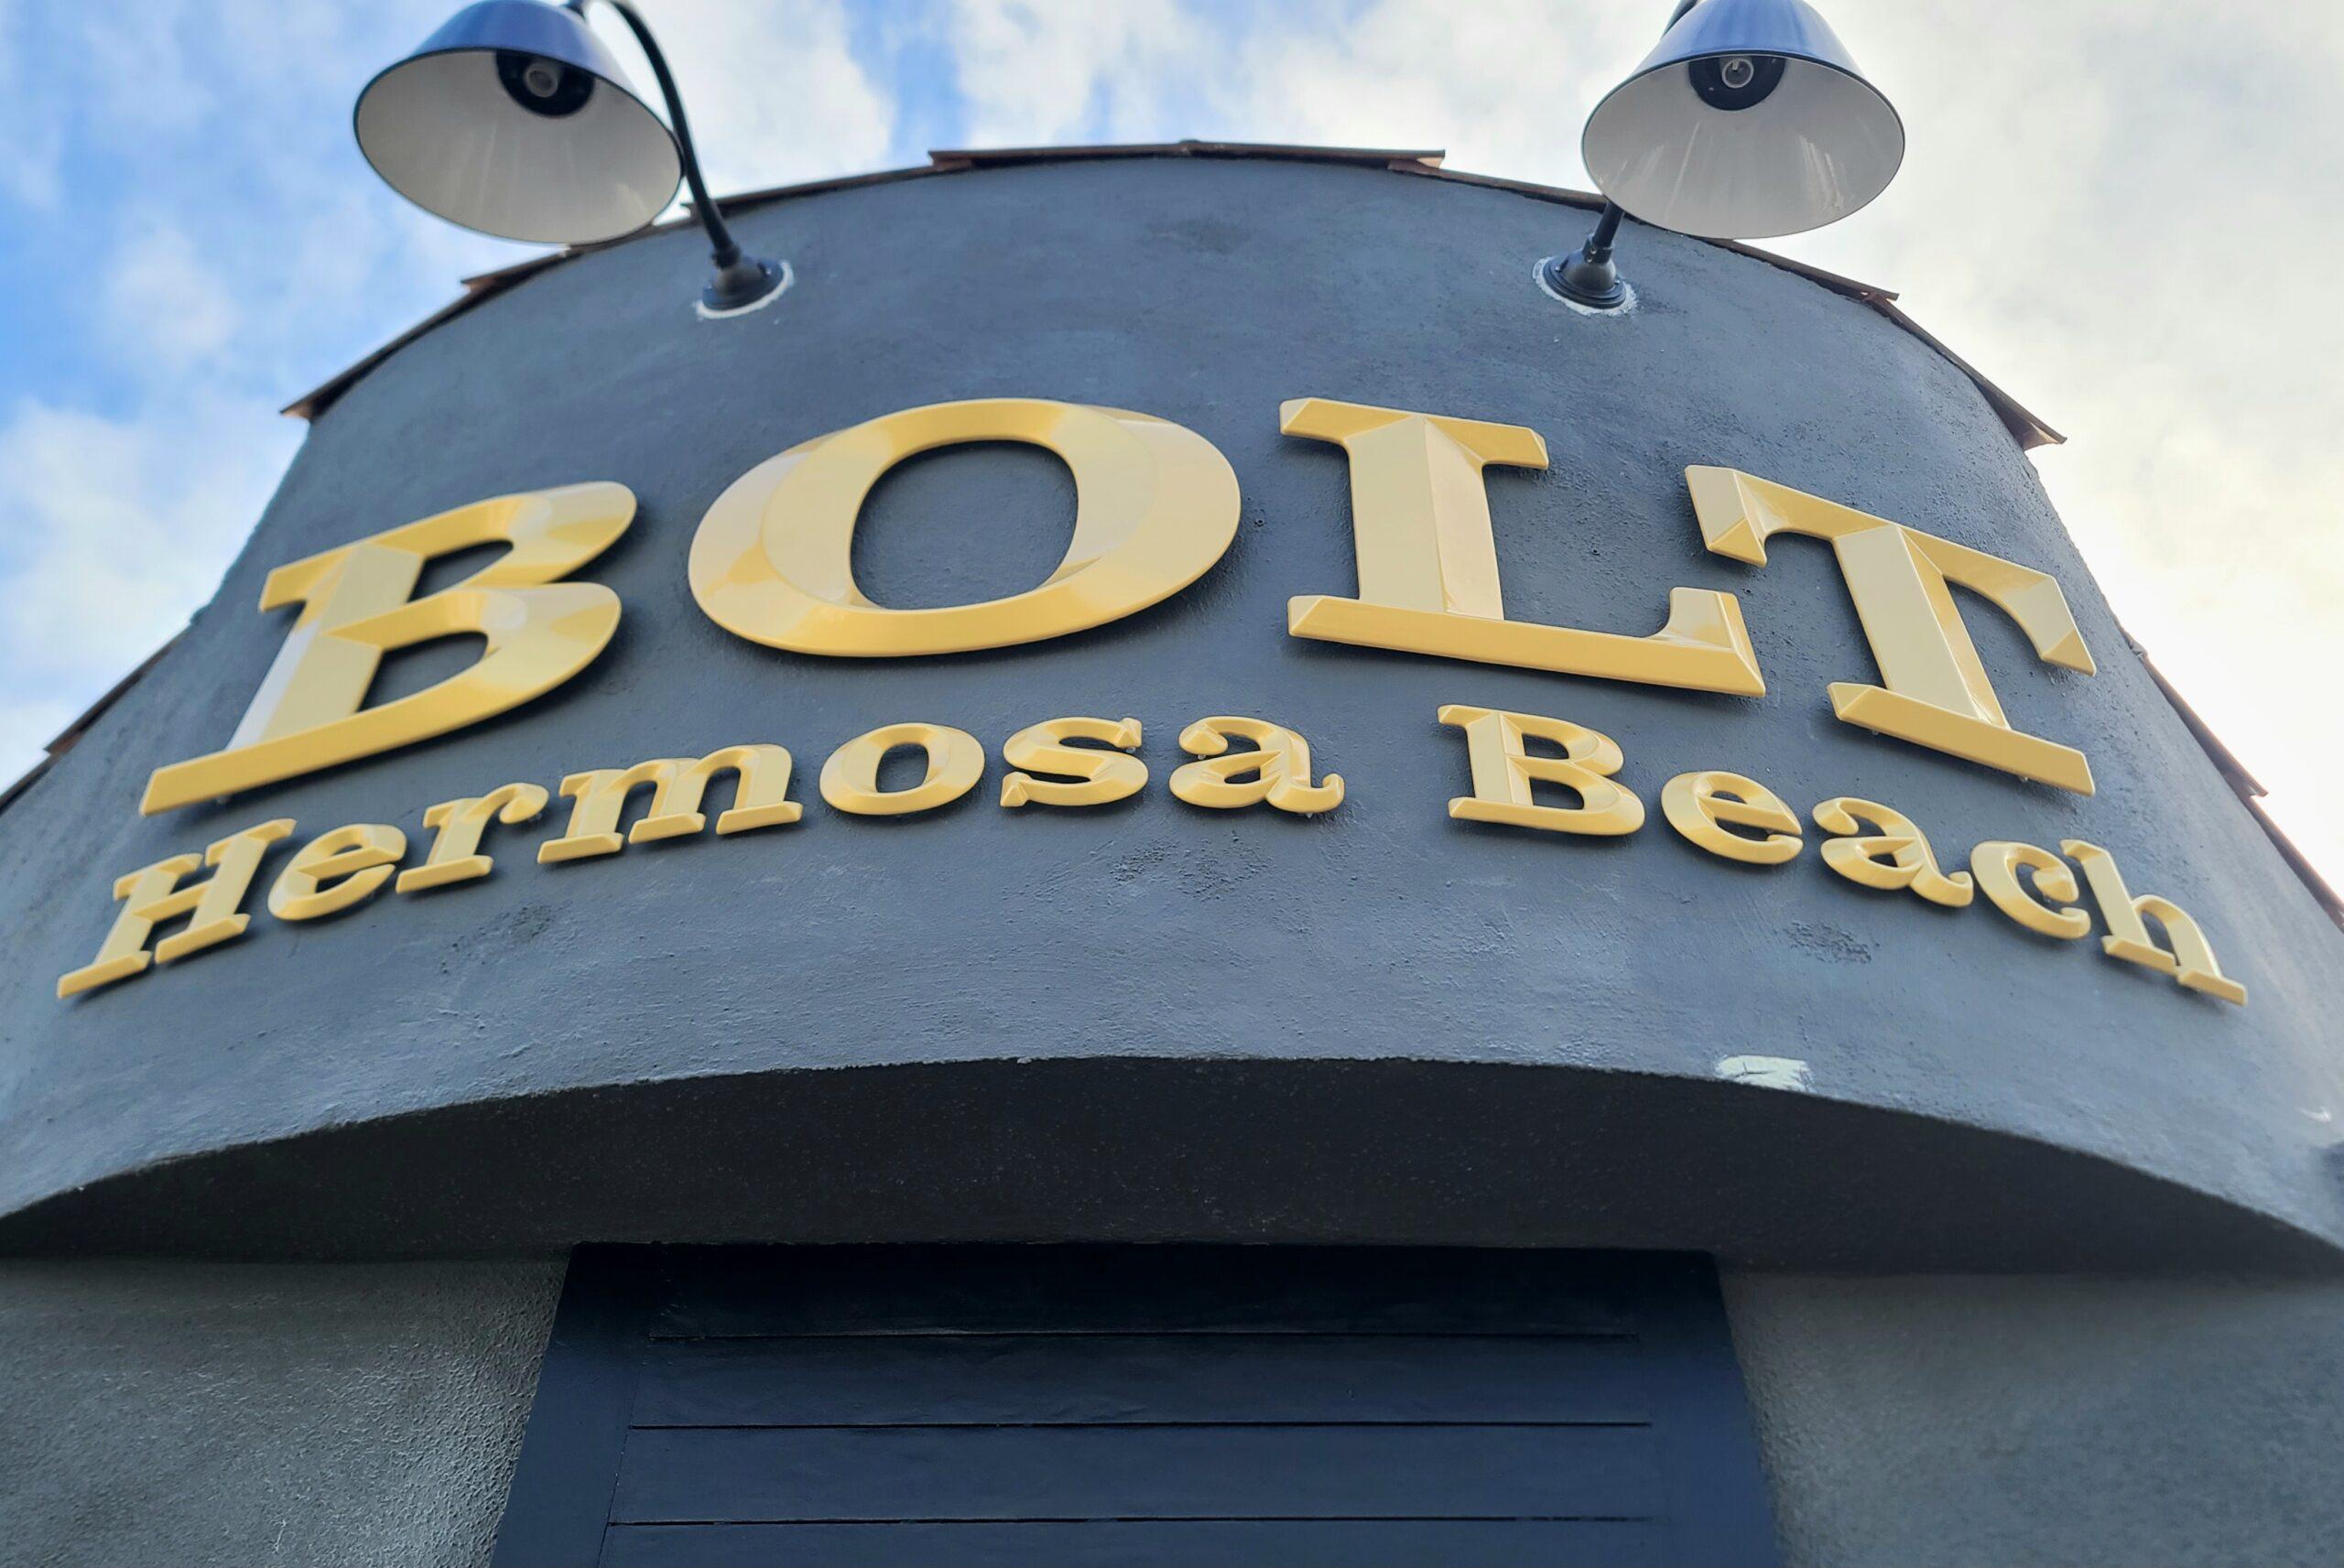 You are currently viewing Dimensional Unlit Sign for Bolt Hermosa Beach